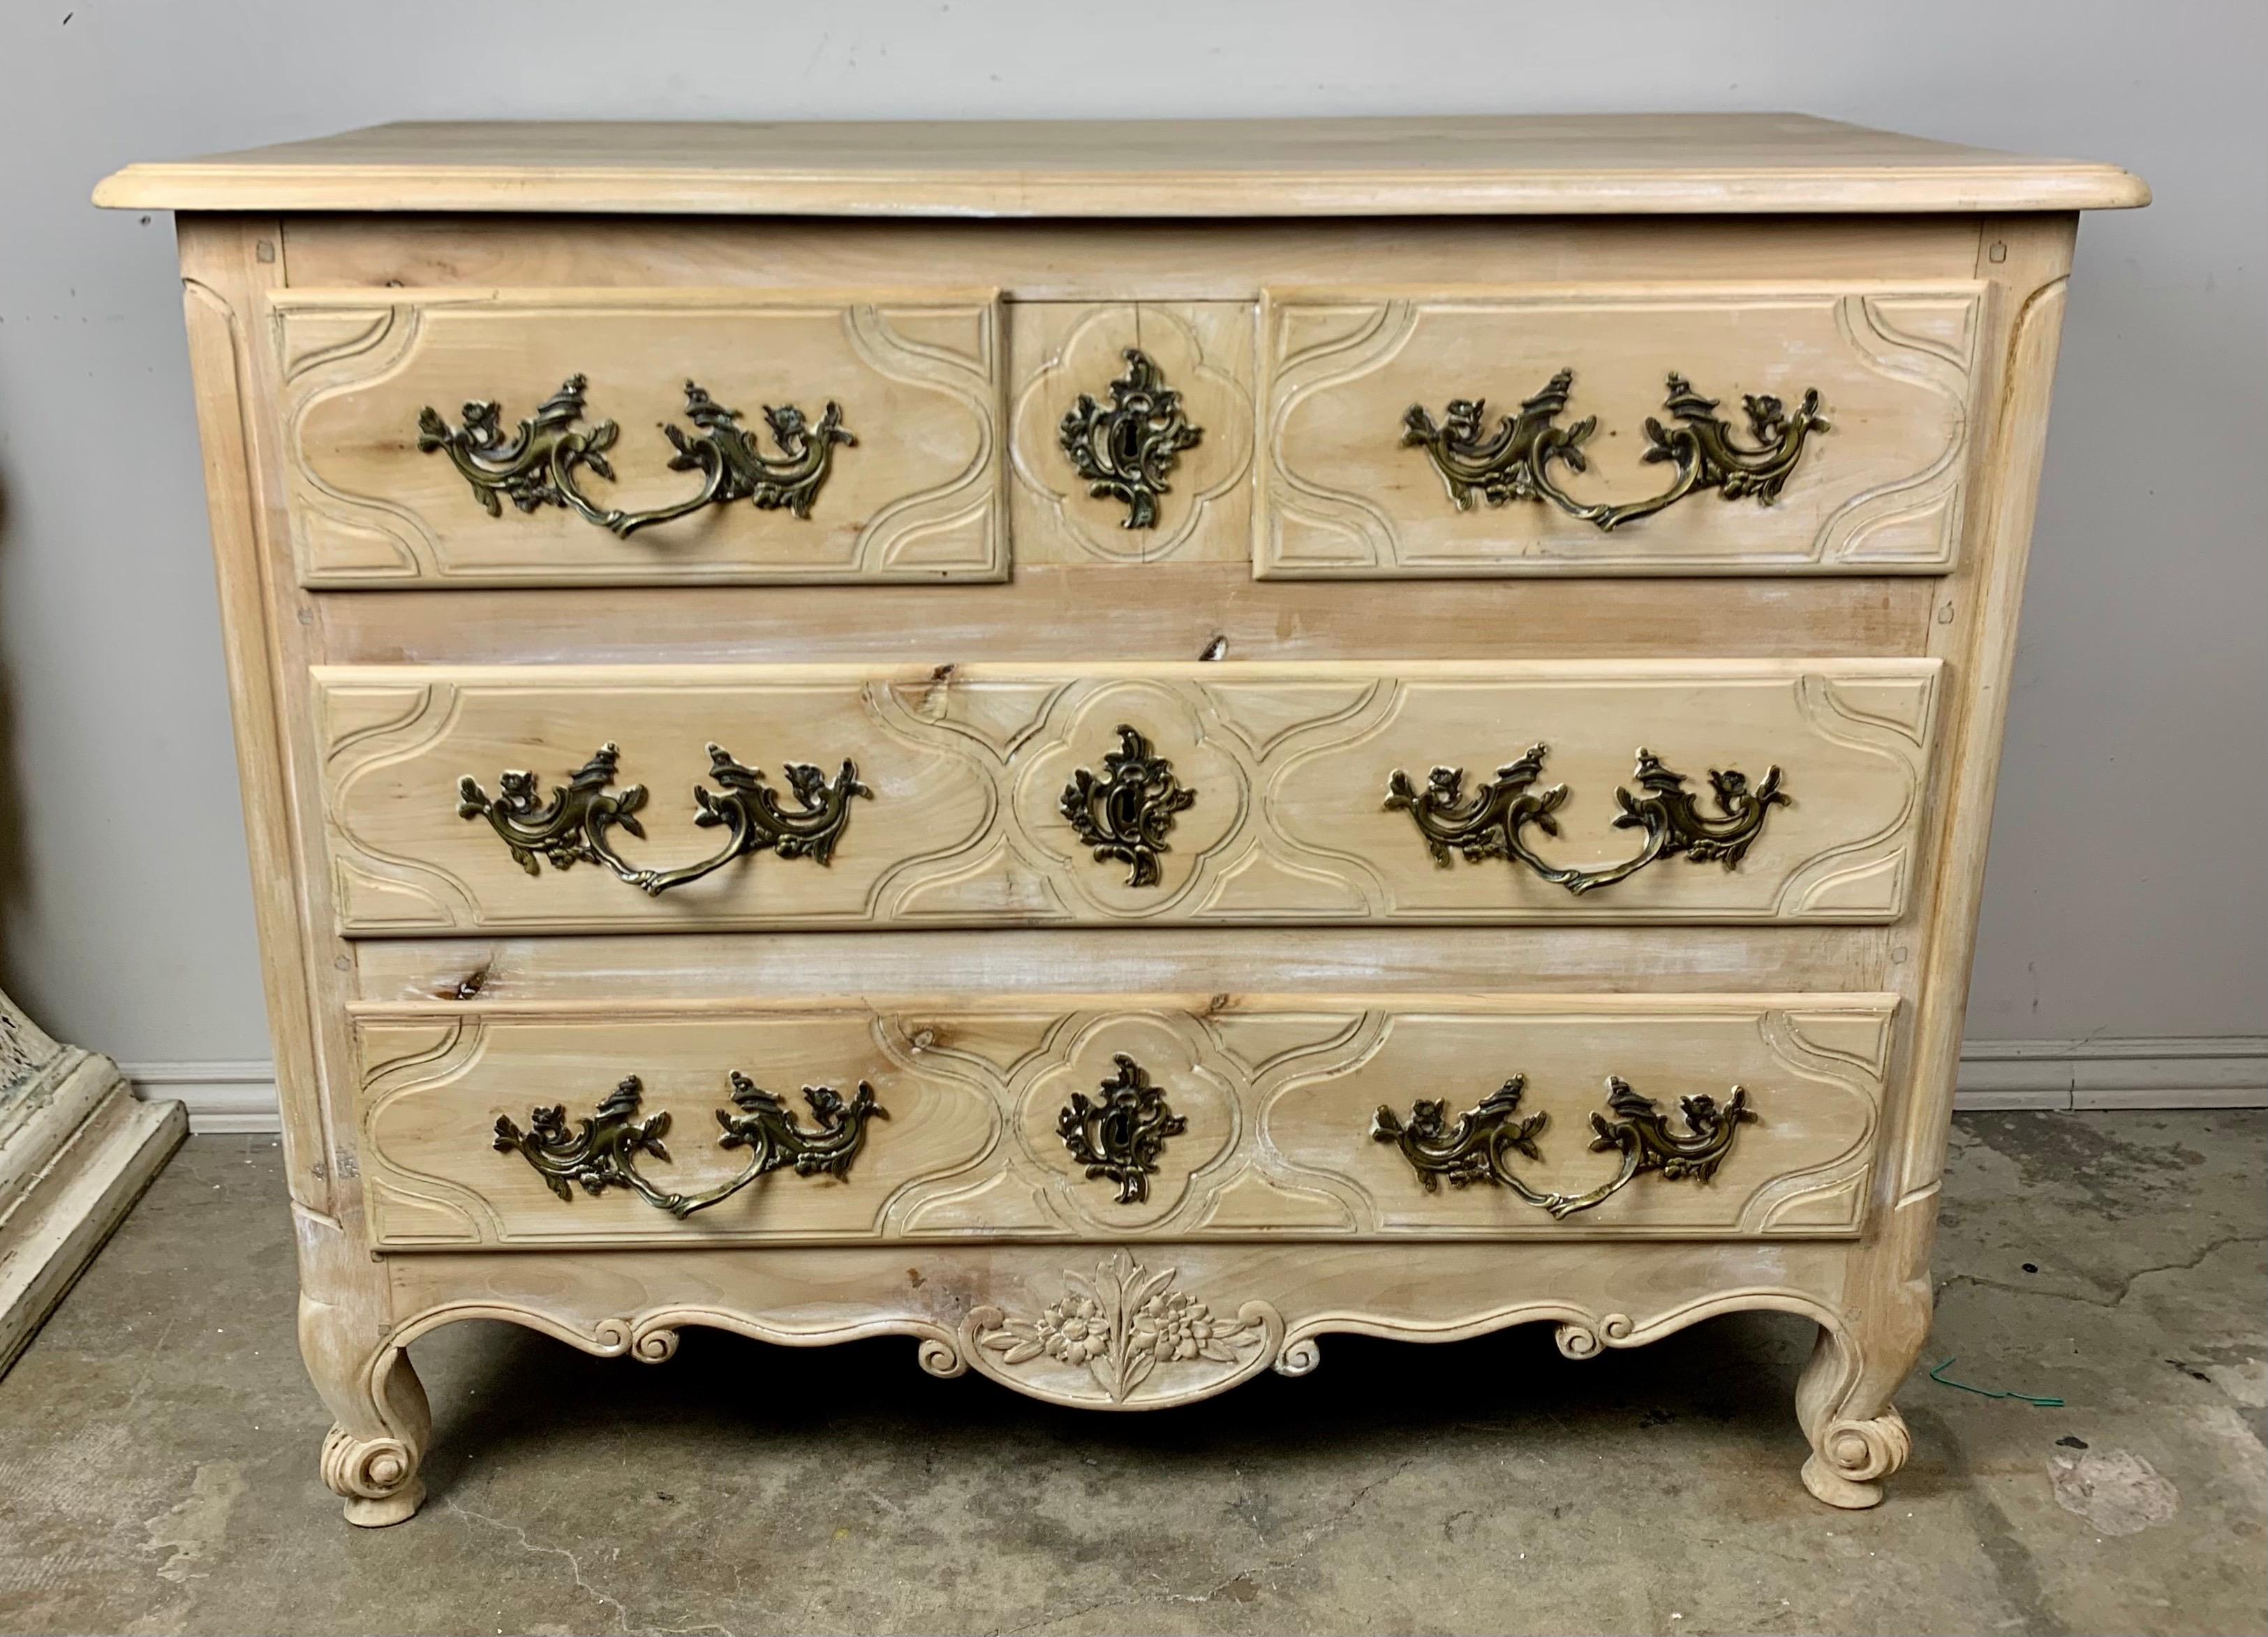 French Louis XV style three drawer dresser with cast brass hardware pulls and key holes. The chest stands on four cabriole legs with rams head feet and a graceful scalloped bottom. The chest has a beautiful natural wood finish.